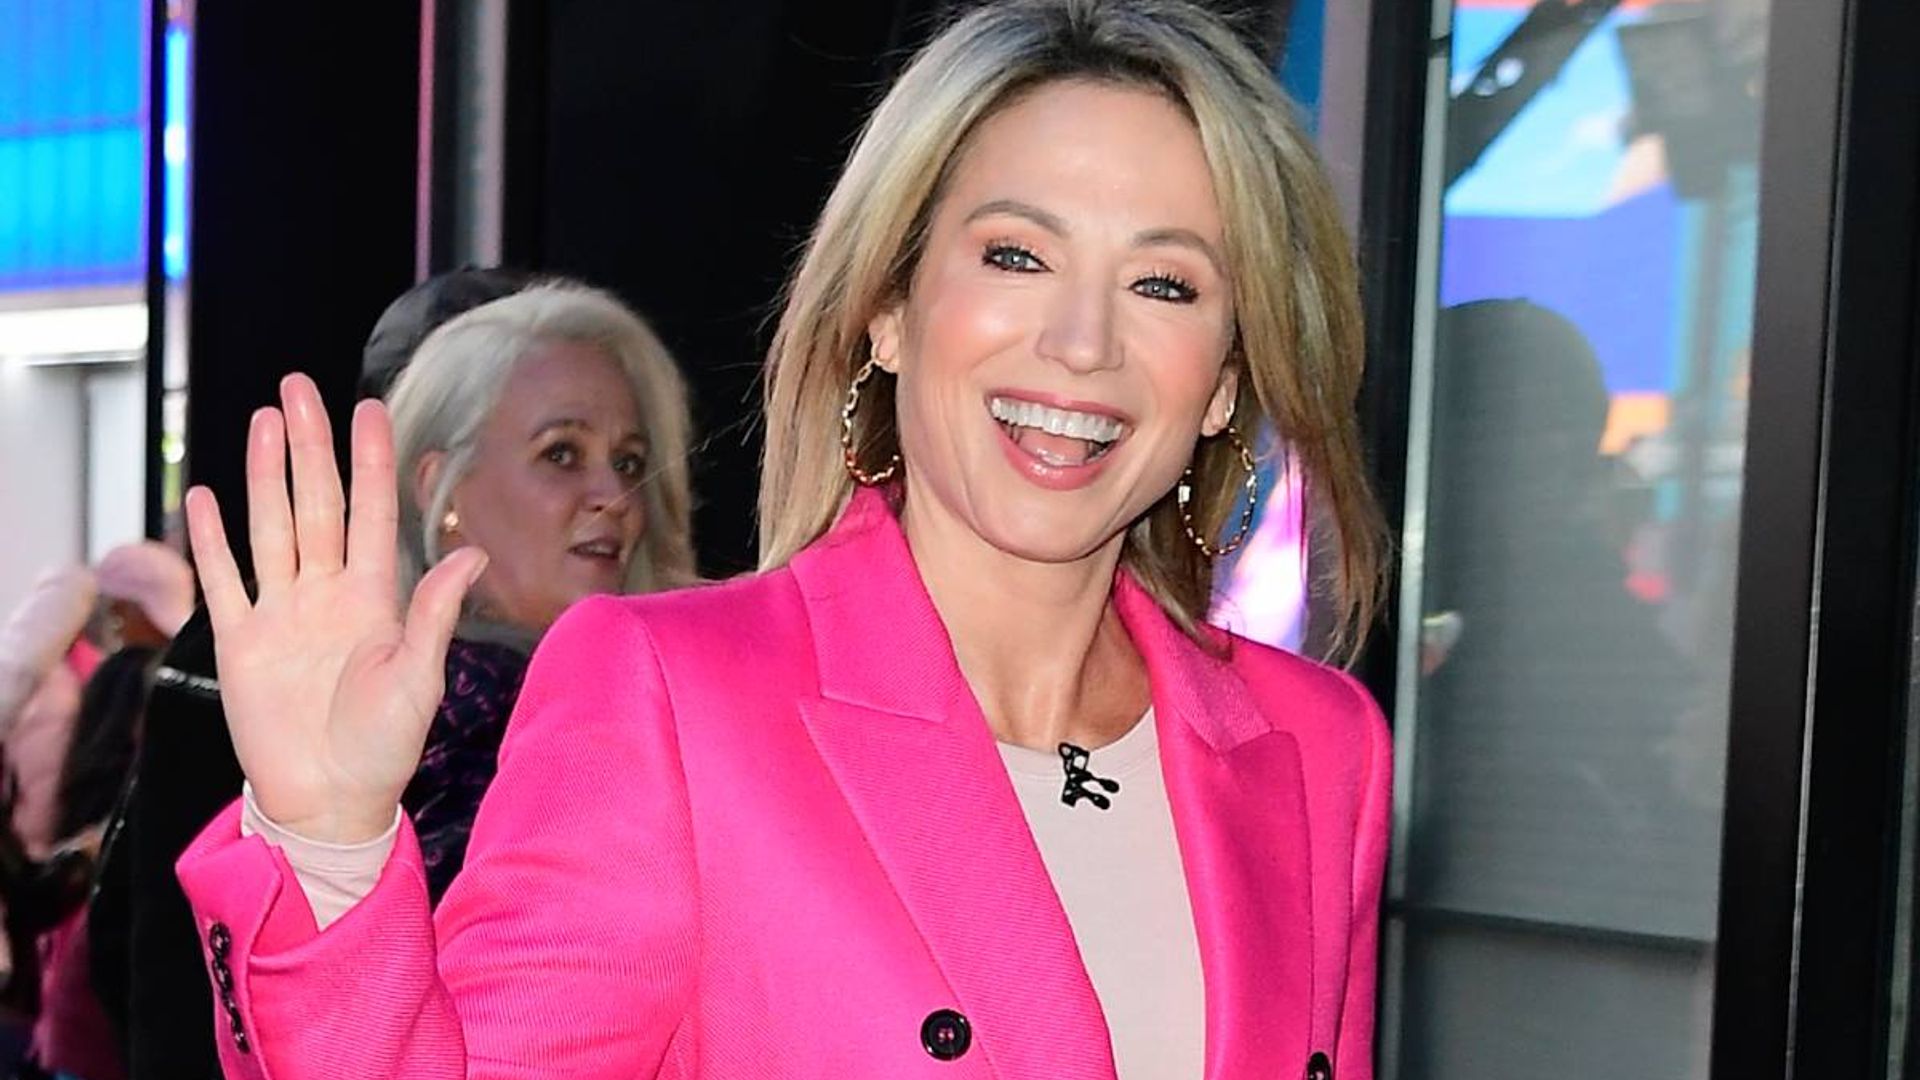 GMA’s Amy Robach’s leading role on show as she supports co-stars